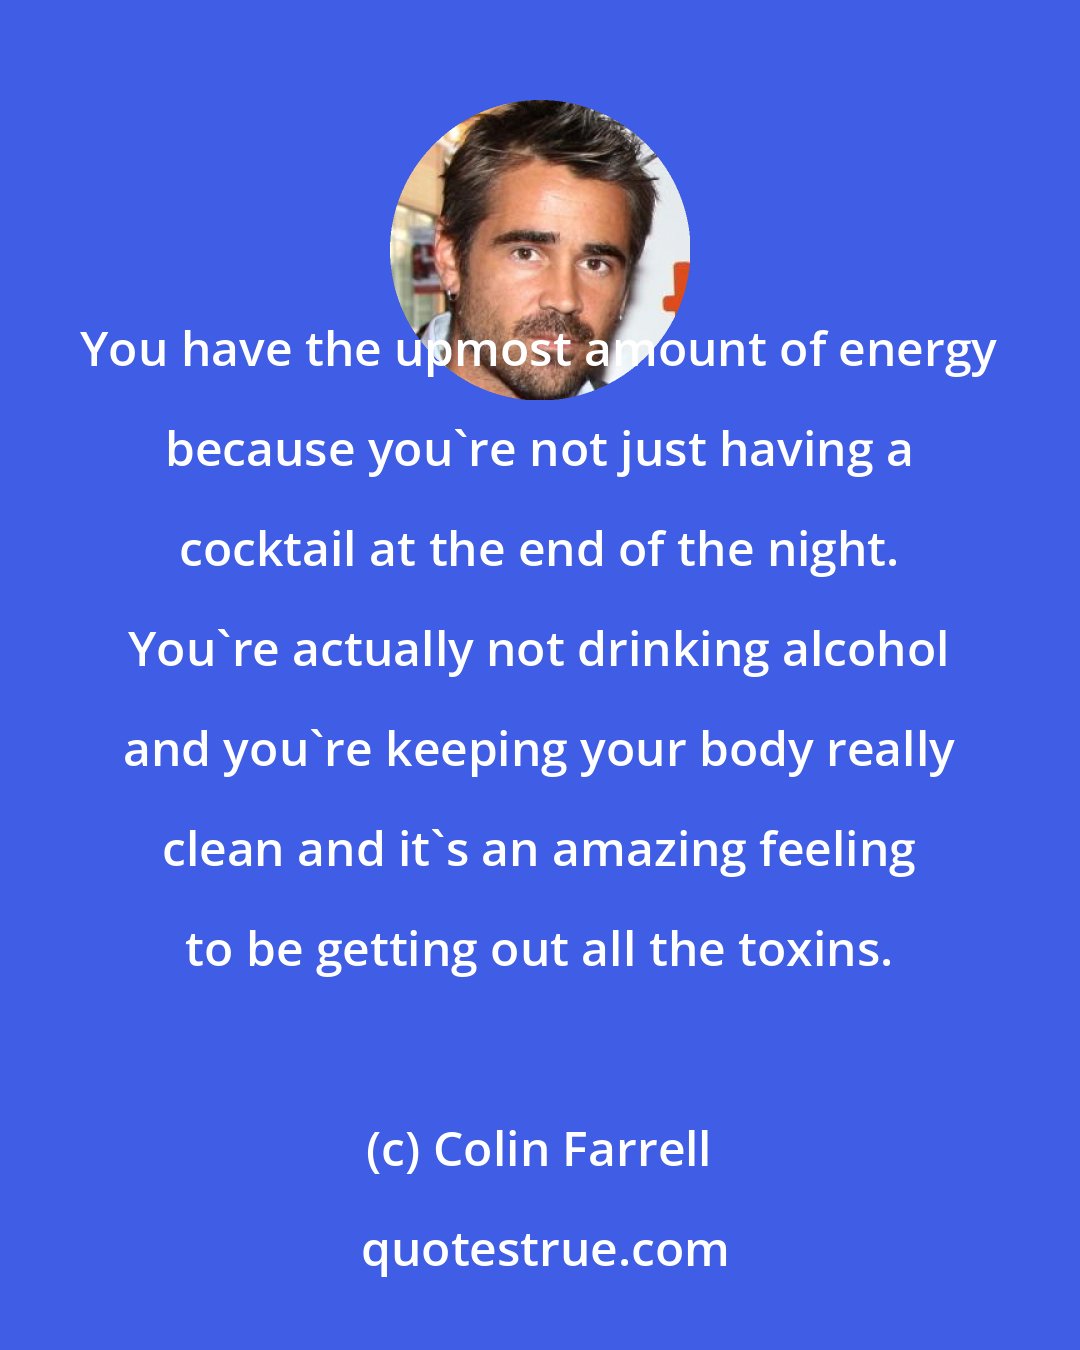 Colin Farrell: You have the upmost amount of energy because you're not just having a cocktail at the end of the night. You're actually not drinking alcohol and you're keeping your body really clean and it's an amazing feeling to be getting out all the toxins.